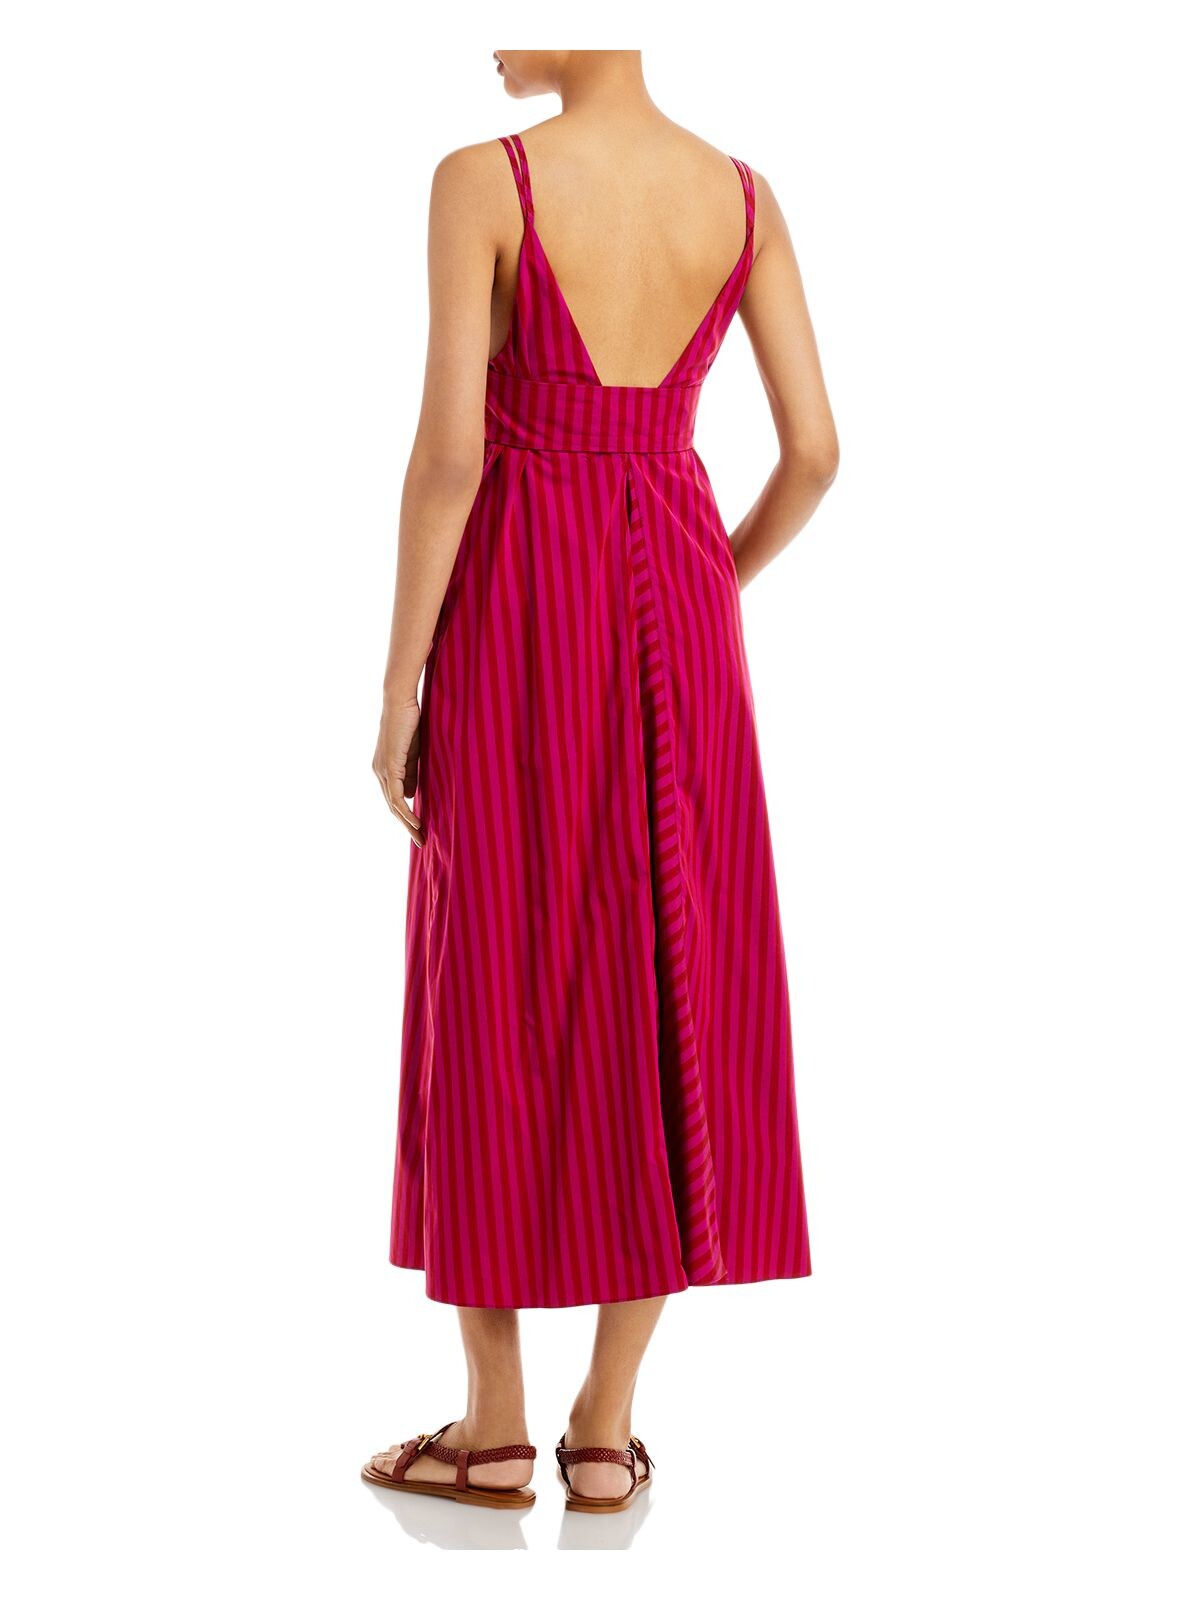 REBECCA TAYLOR Womens Purple Tie Open Back Unlined Textured Striped V Neck Tea-Length Fit + Flare Dress 6